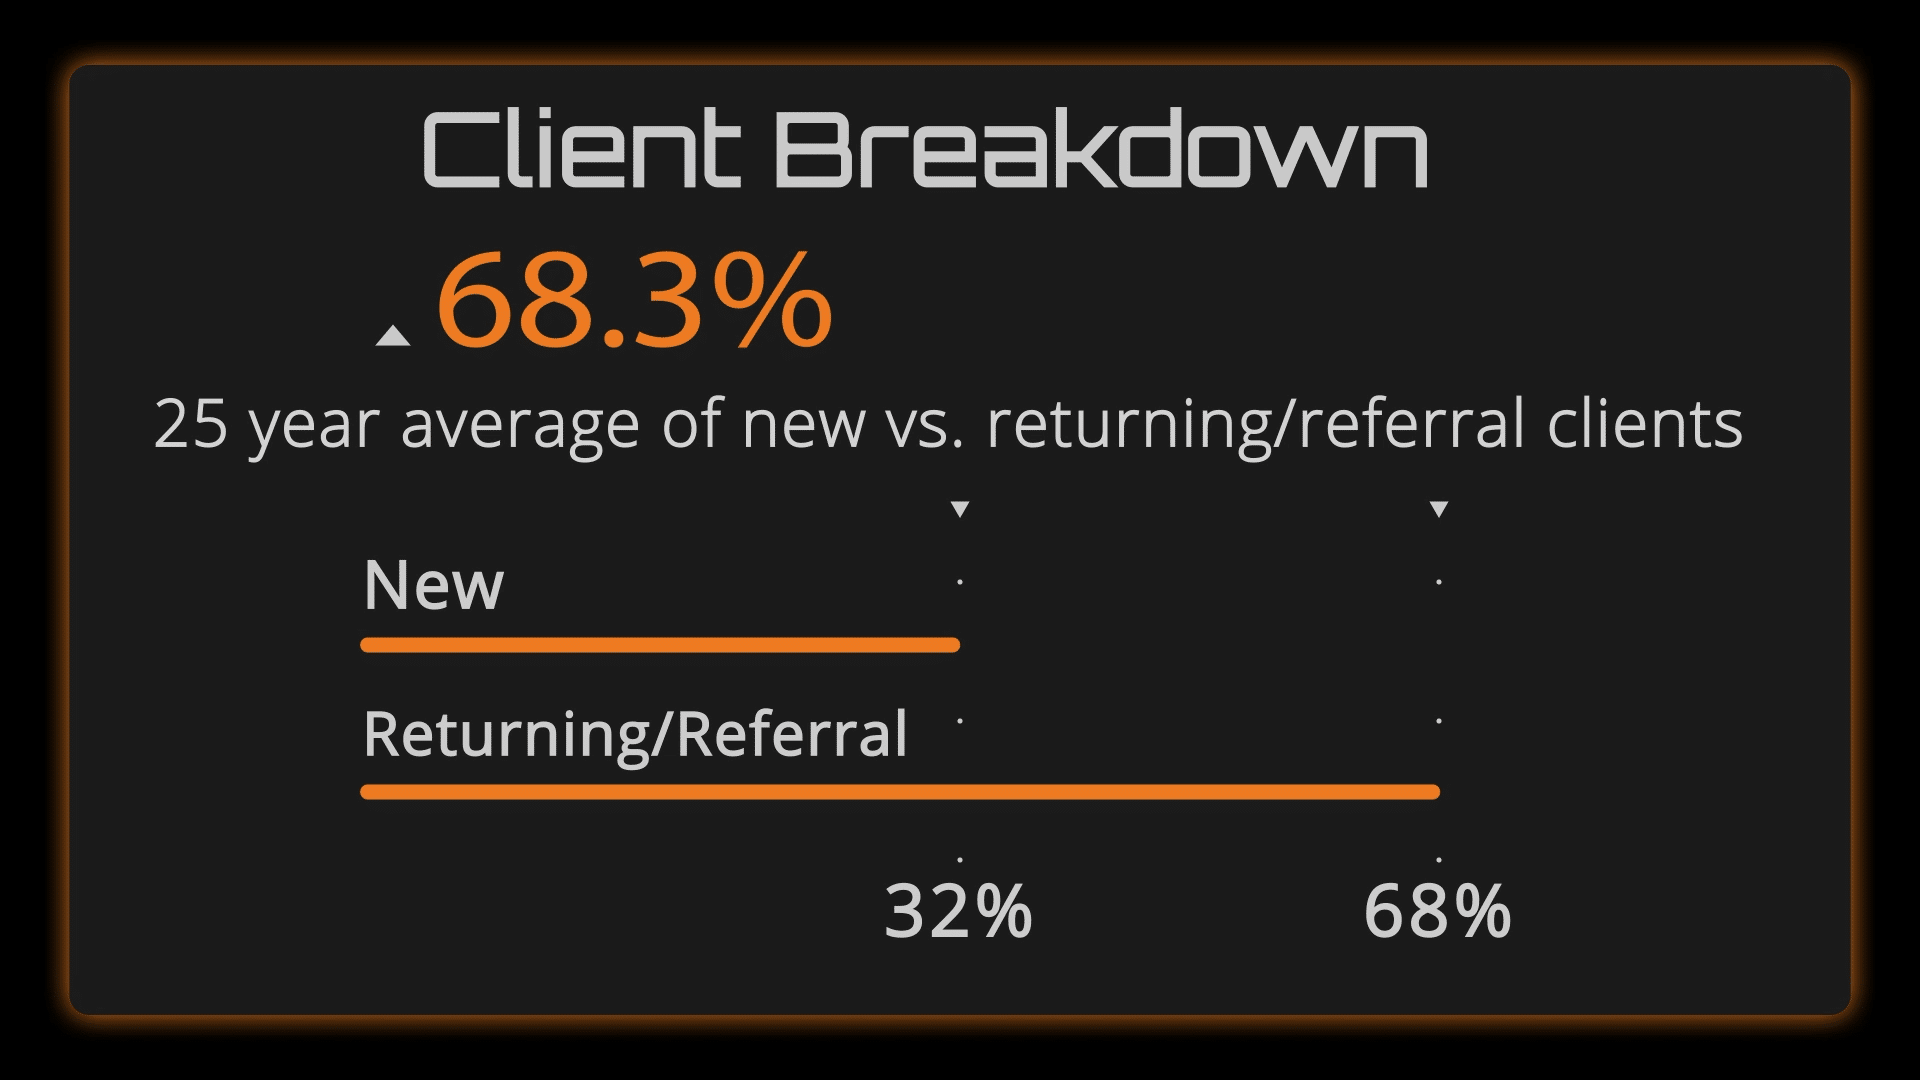 Infographic showing ratio of new vs returning clients at 68%